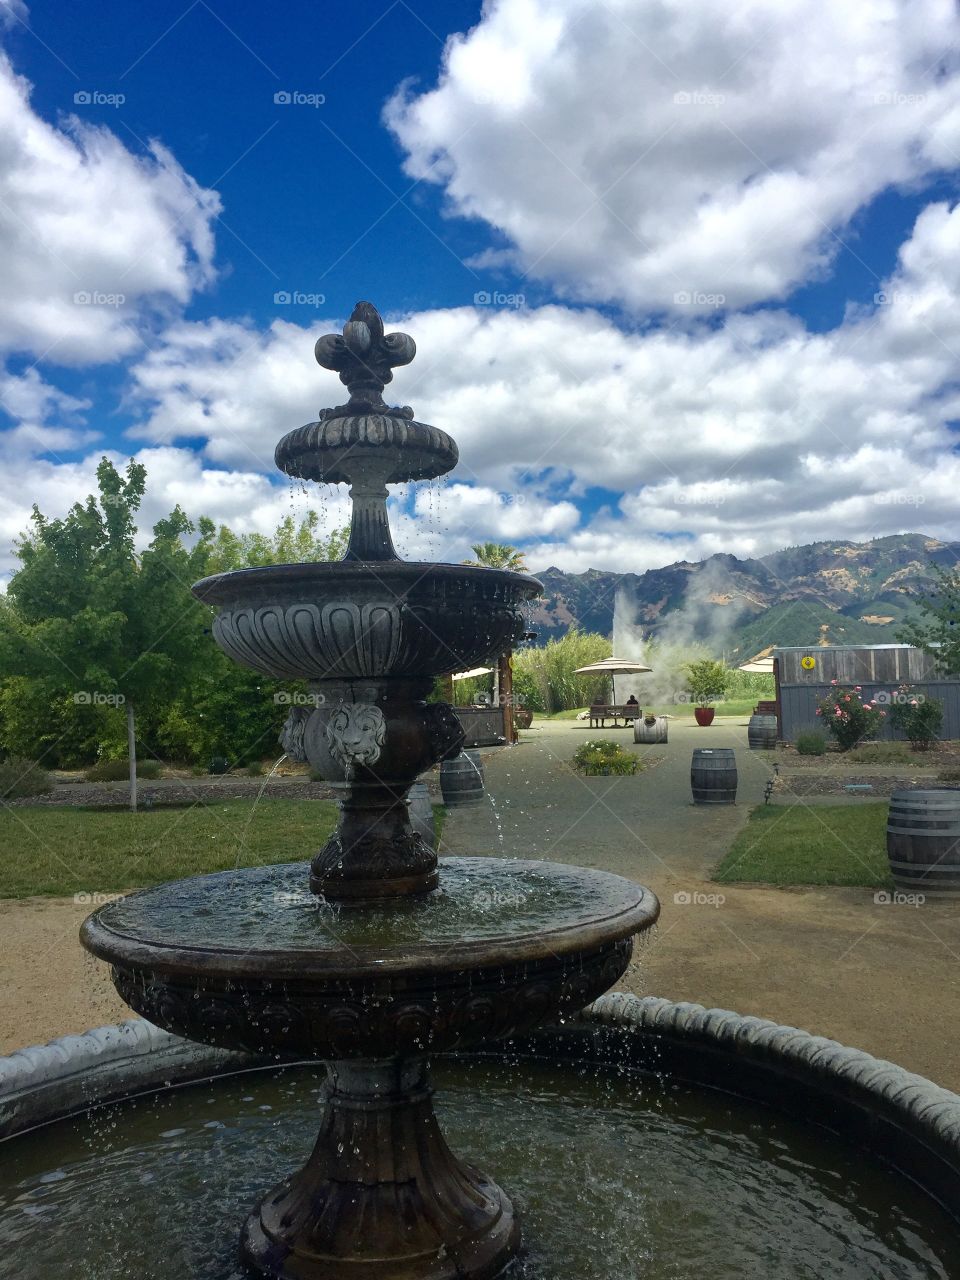 Old Faithful, Napa County, St Helena, Geyser, CA, California, Water Fountain, Water Feature, Blue Sky, California, Old Faithful Geyser of California, Hot Steaming Water, Beauty, Mother Nature Wonders